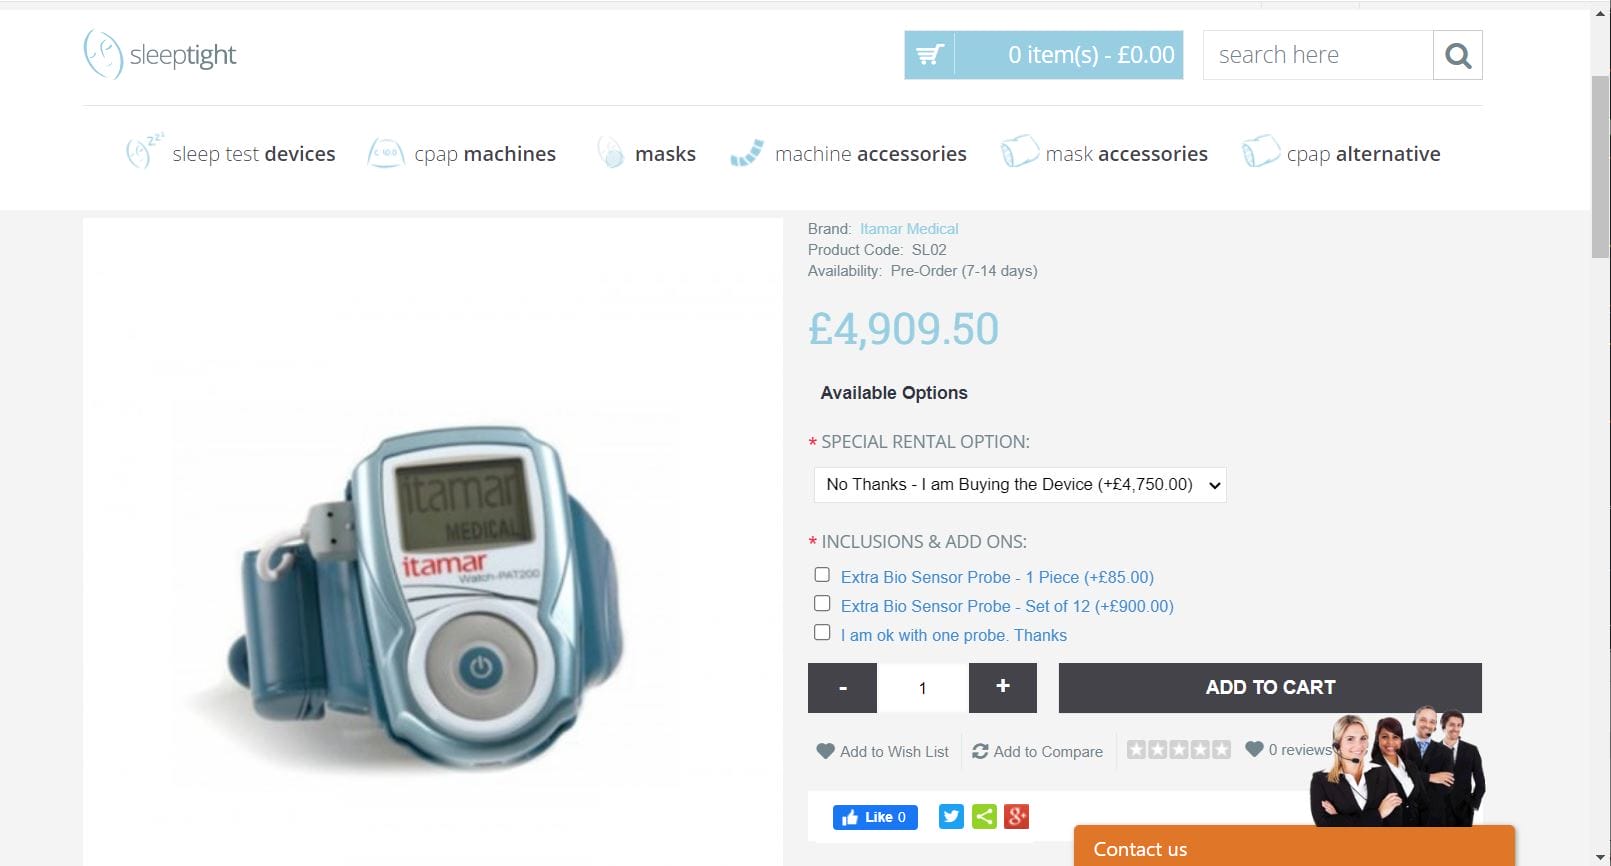 Screenshot of an online medical supply store page featuring a WatchPAT 200 CPAP machine priced at £4,909.00 with additional rental options listed.